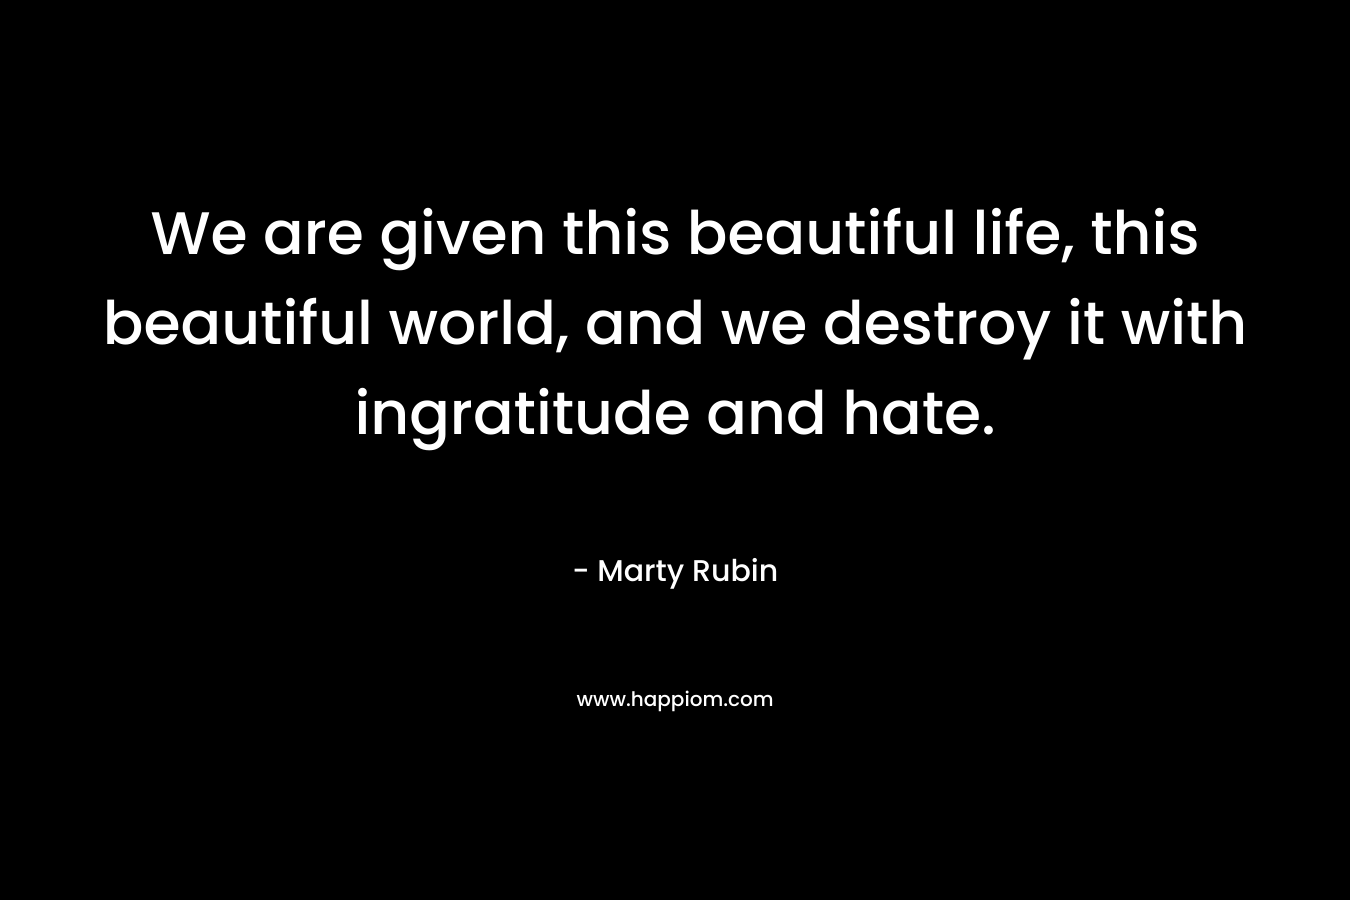 We are given this beautiful life, this beautiful world, and we destroy it with ingratitude and hate. – Marty Rubin